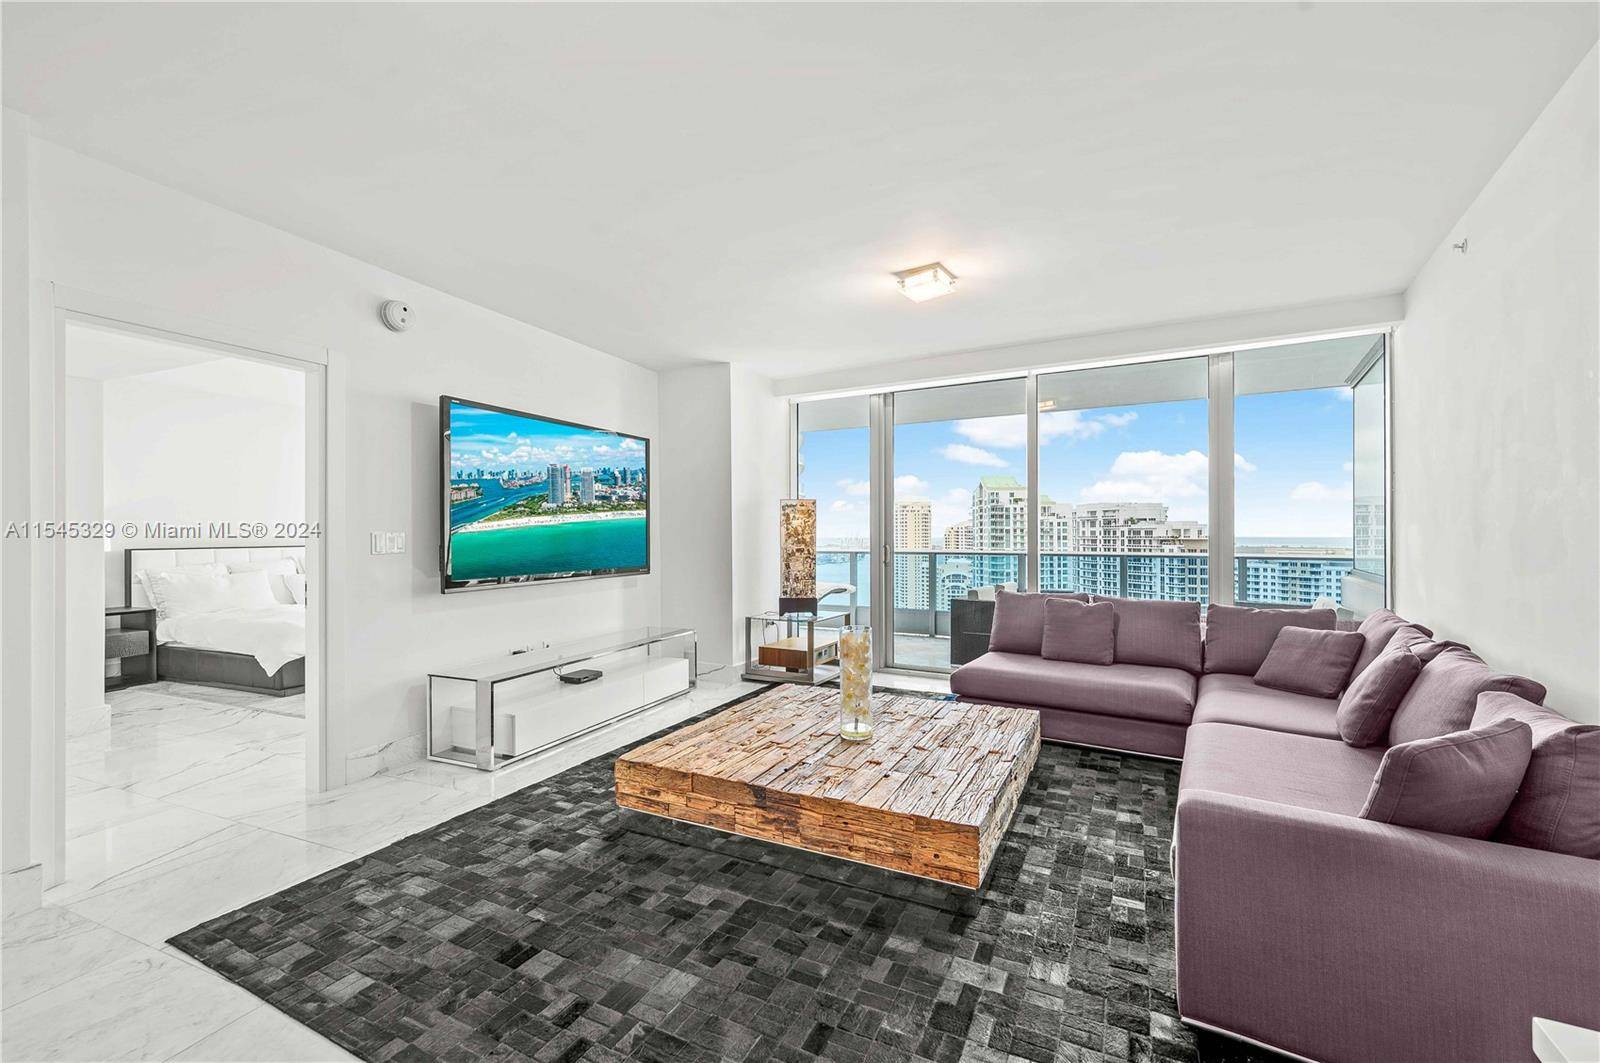 Welcome to Unit 3805 at Epic West, one of Downtown Miami's most coveted addresses.